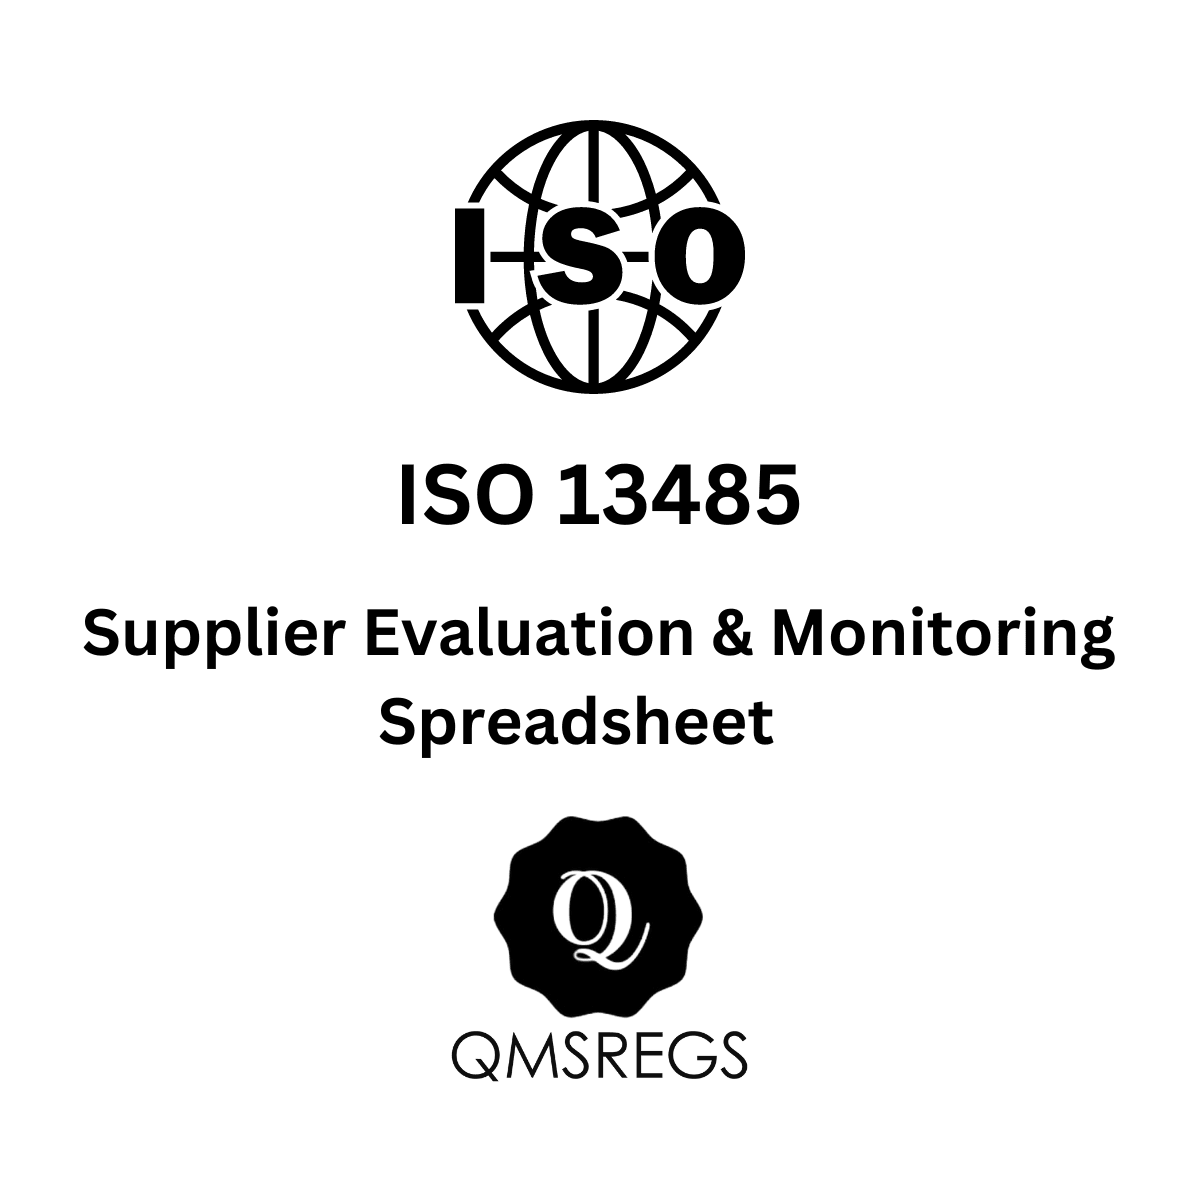 ISO 13485 Supplier Evaluation and Monitoring Spreadsheet Template